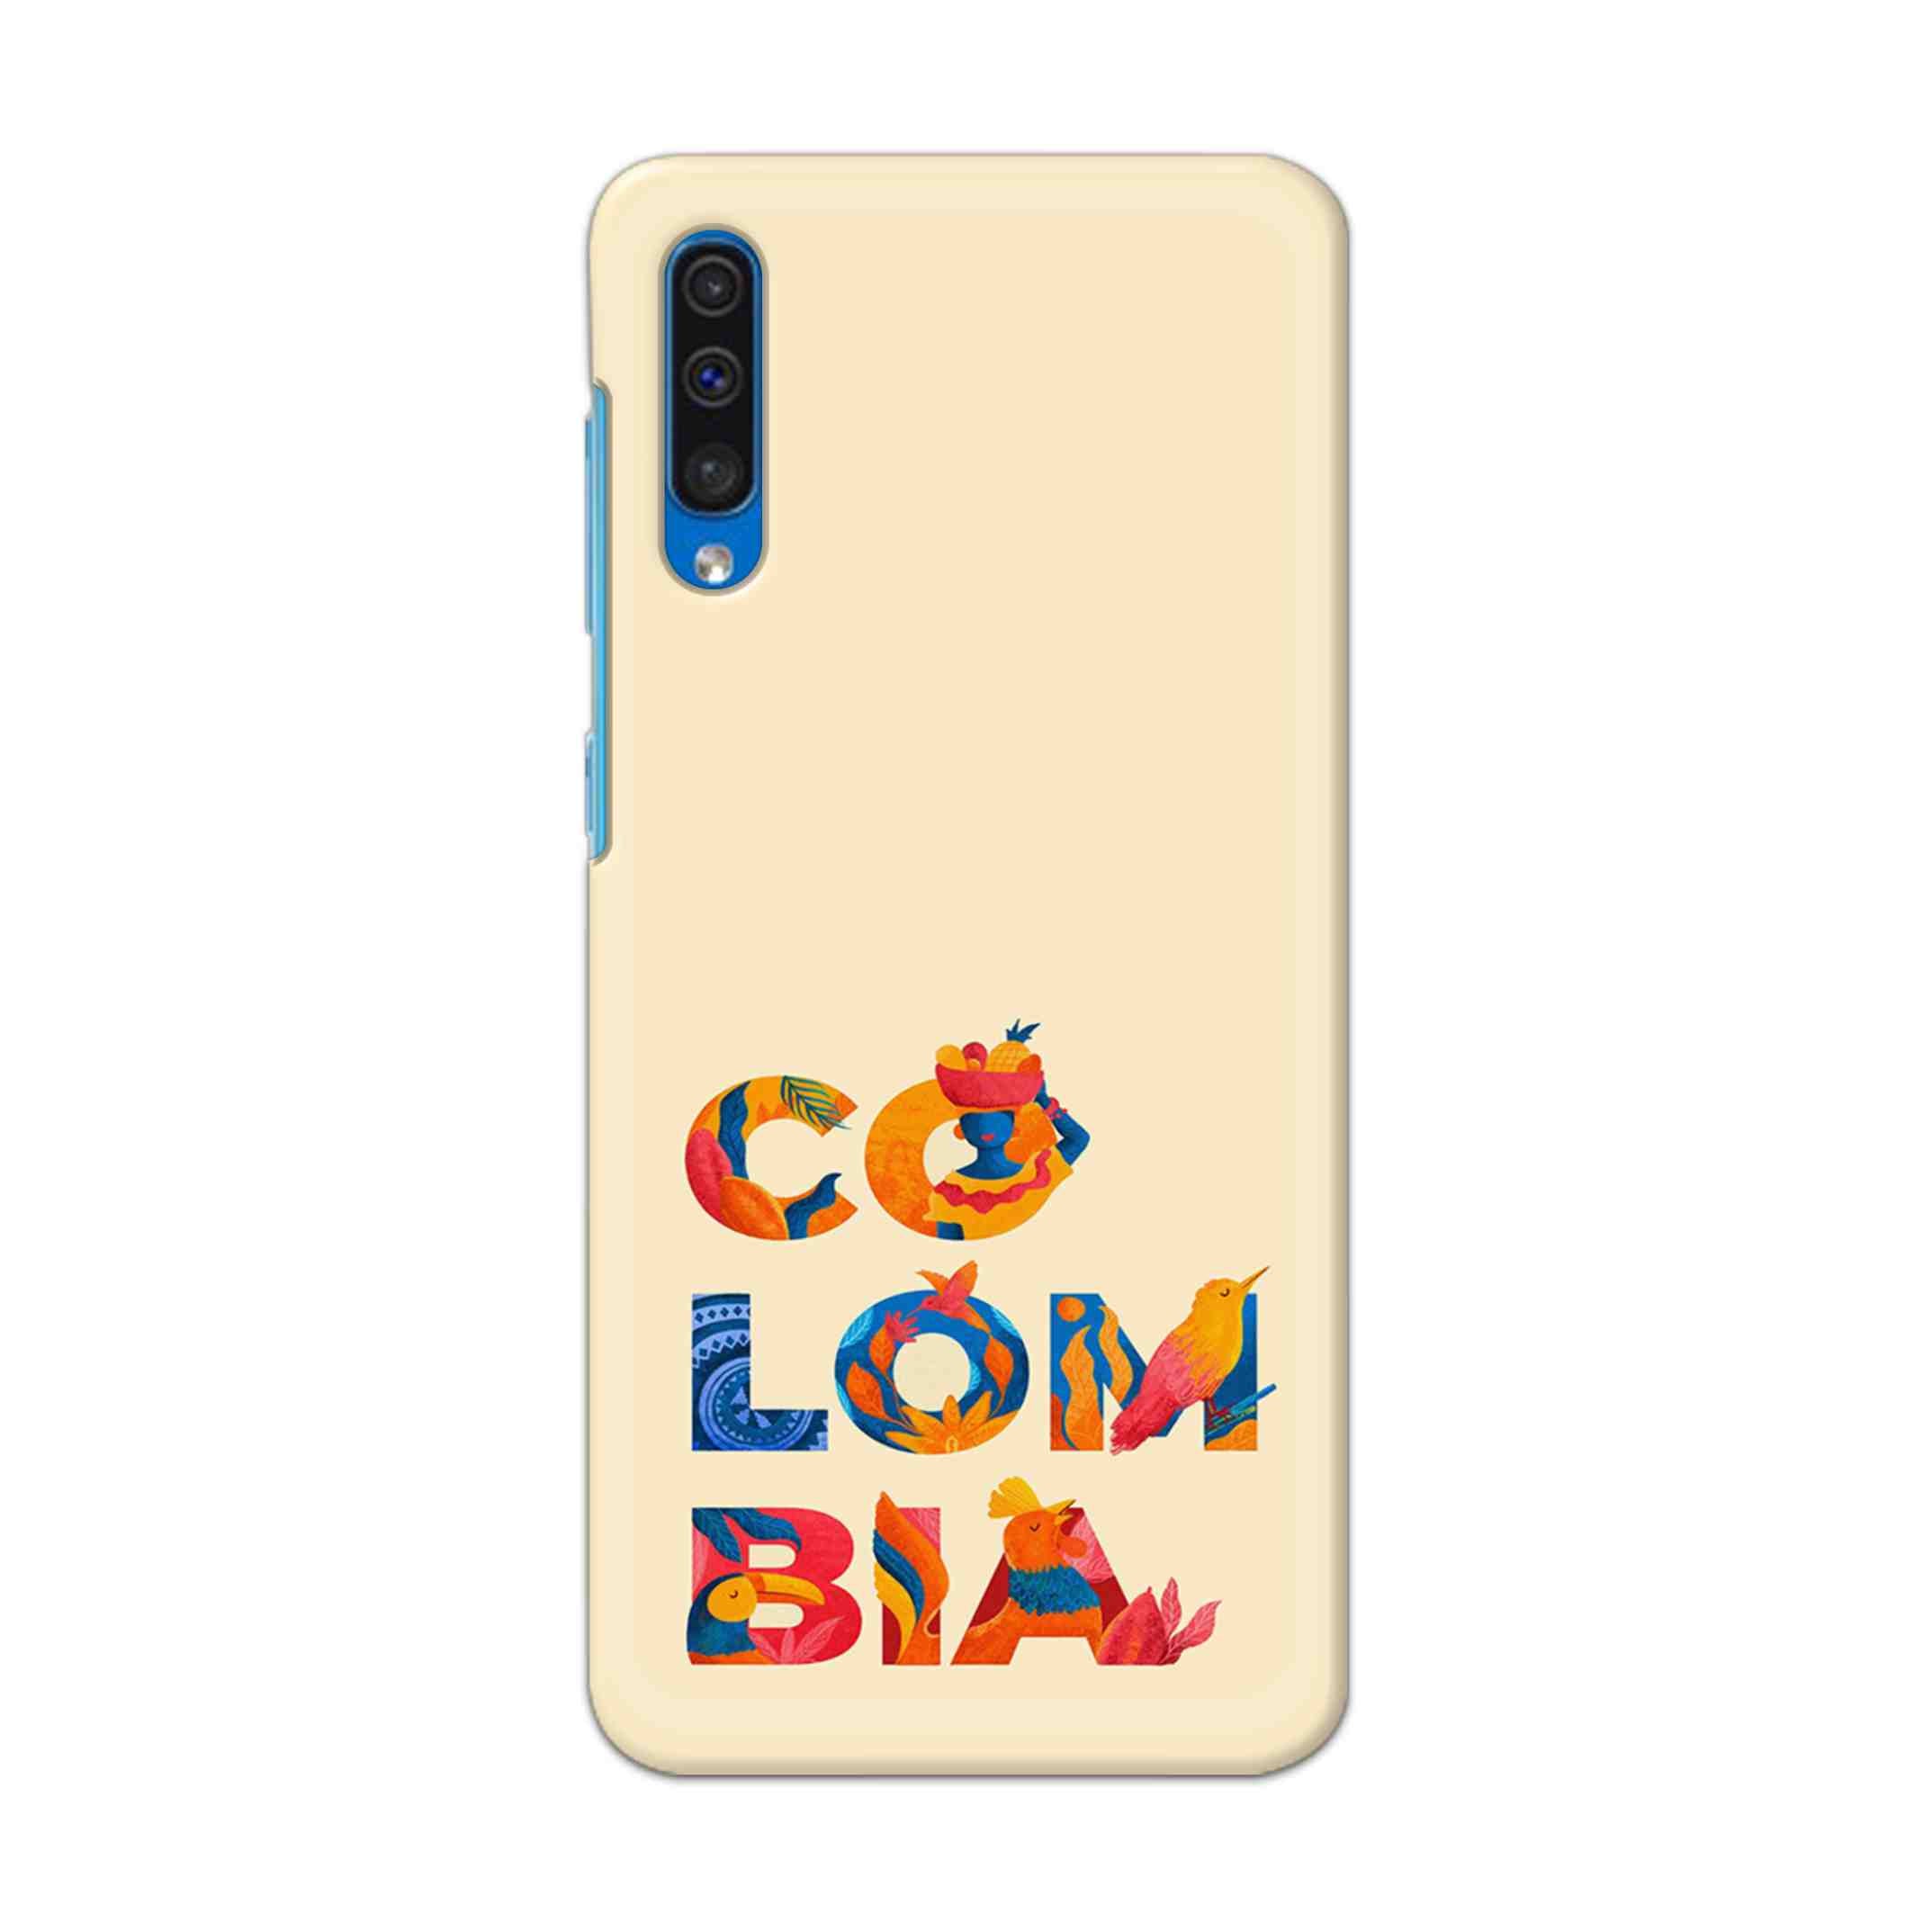 Buy Colombia Hard Back Mobile Phone Case Cover For Samsung Galaxy A50 / A50s / A30s Online